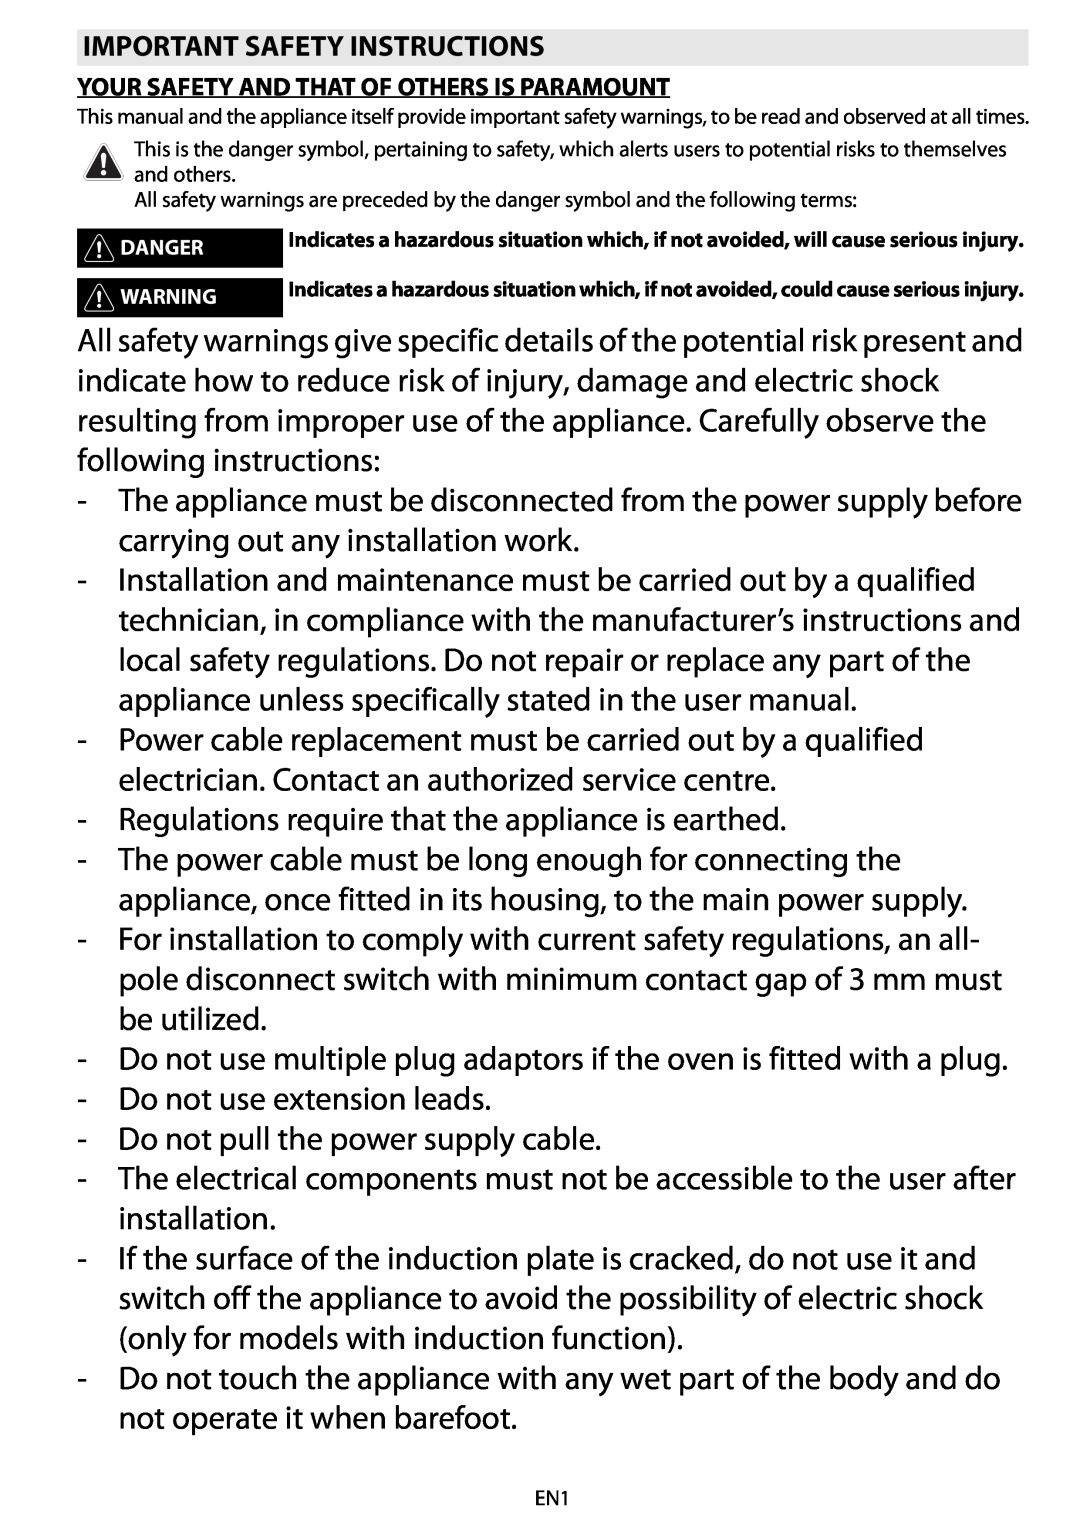 Whirlpool AKZM 775 manual do utilizador Regulations require that the appliance is earthed 